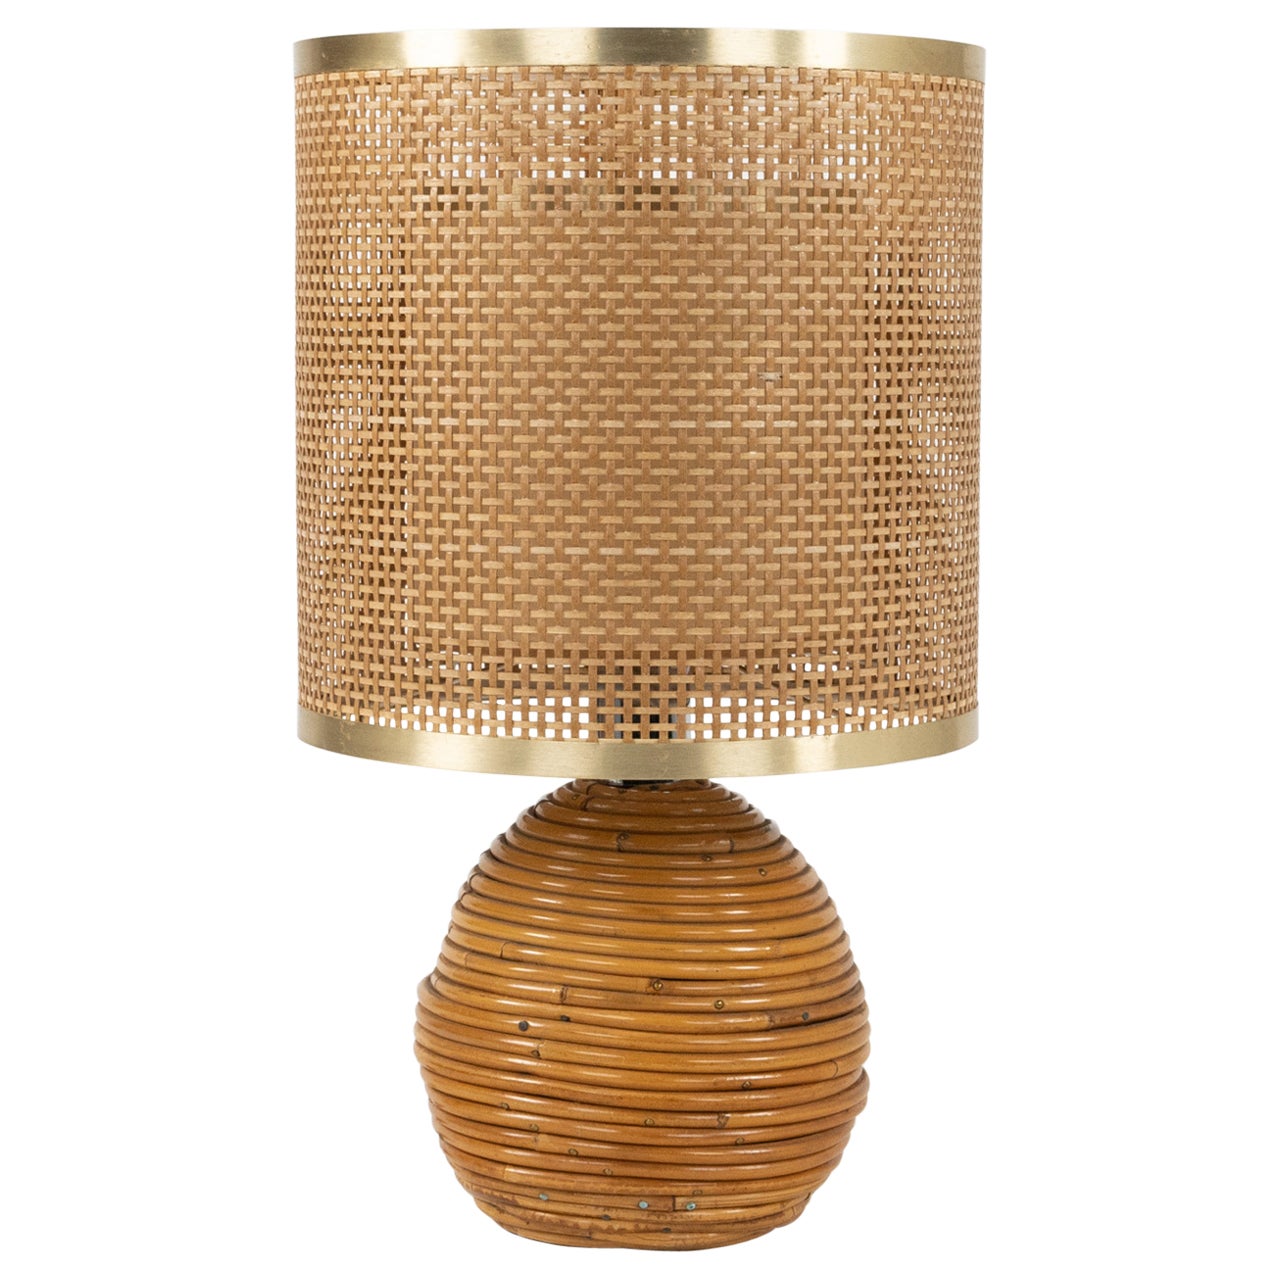 Midcentury Rattan, Wicker and Chrome Table Lamp by Vivai Del Sud, Italy 1970s For Sale